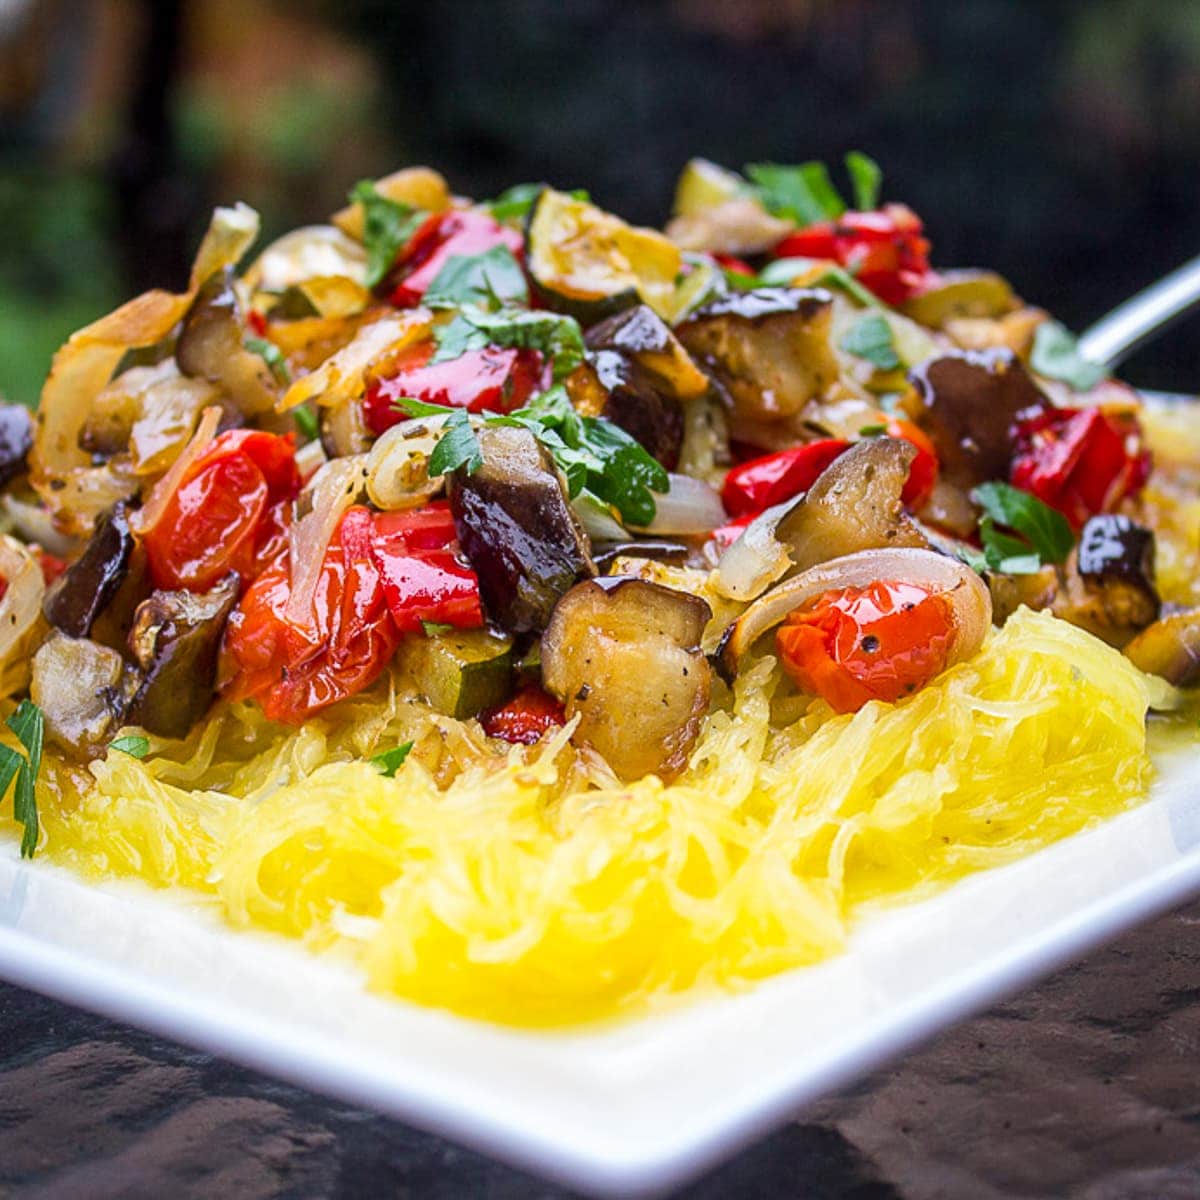 Spaghetti Squash Recipe With Roasted Vegetables